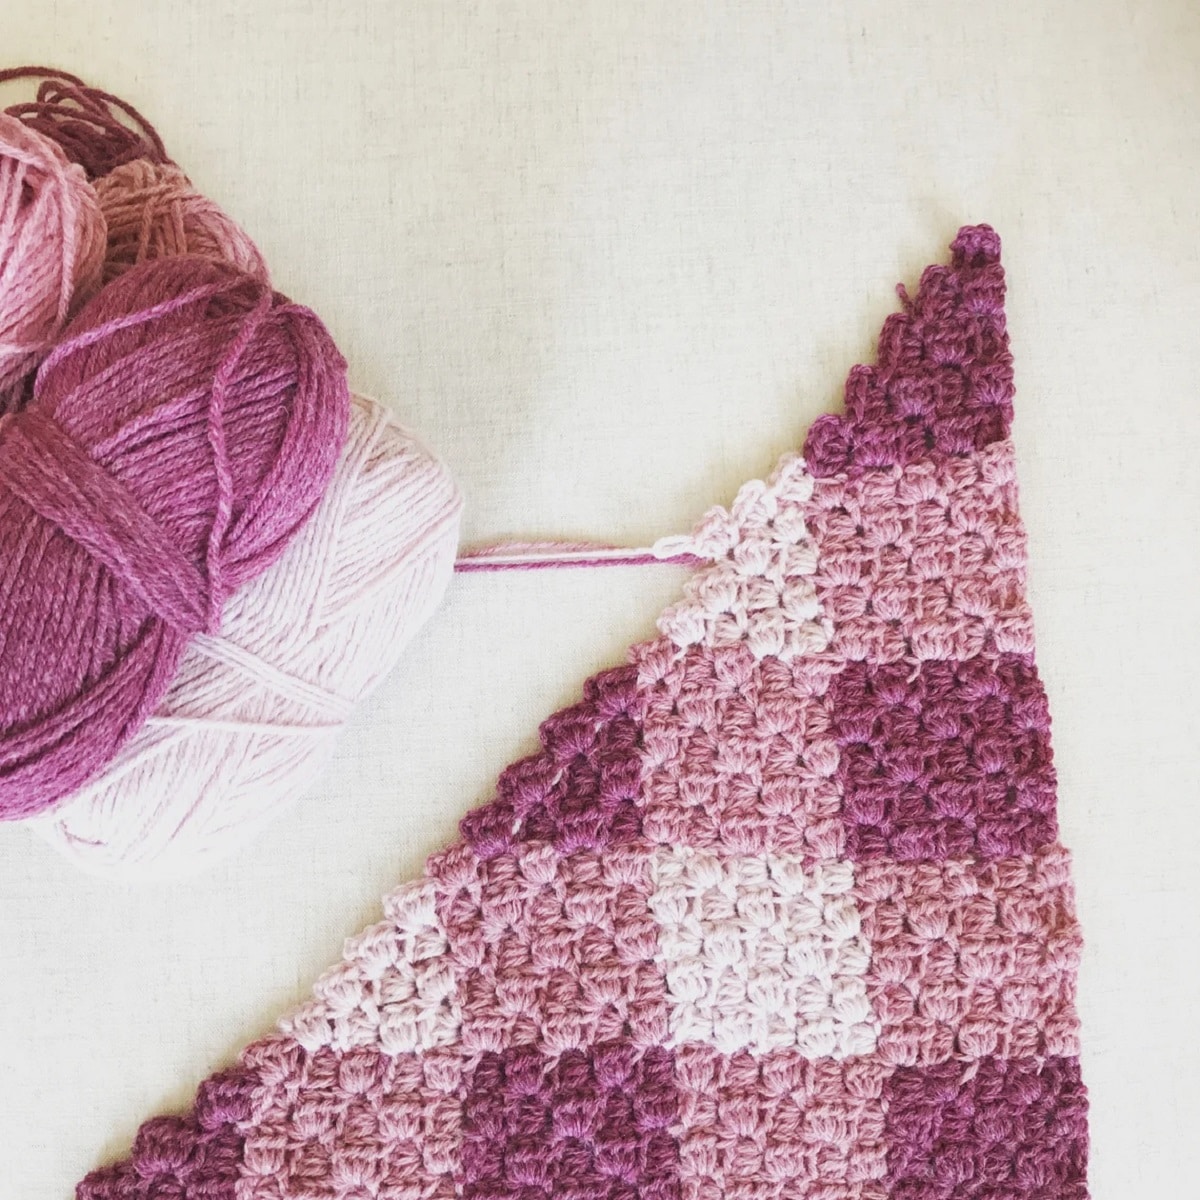 A small triangle of a purple, pink, and white gingham style crochet blanket with balls of yarn in the same color next to it.